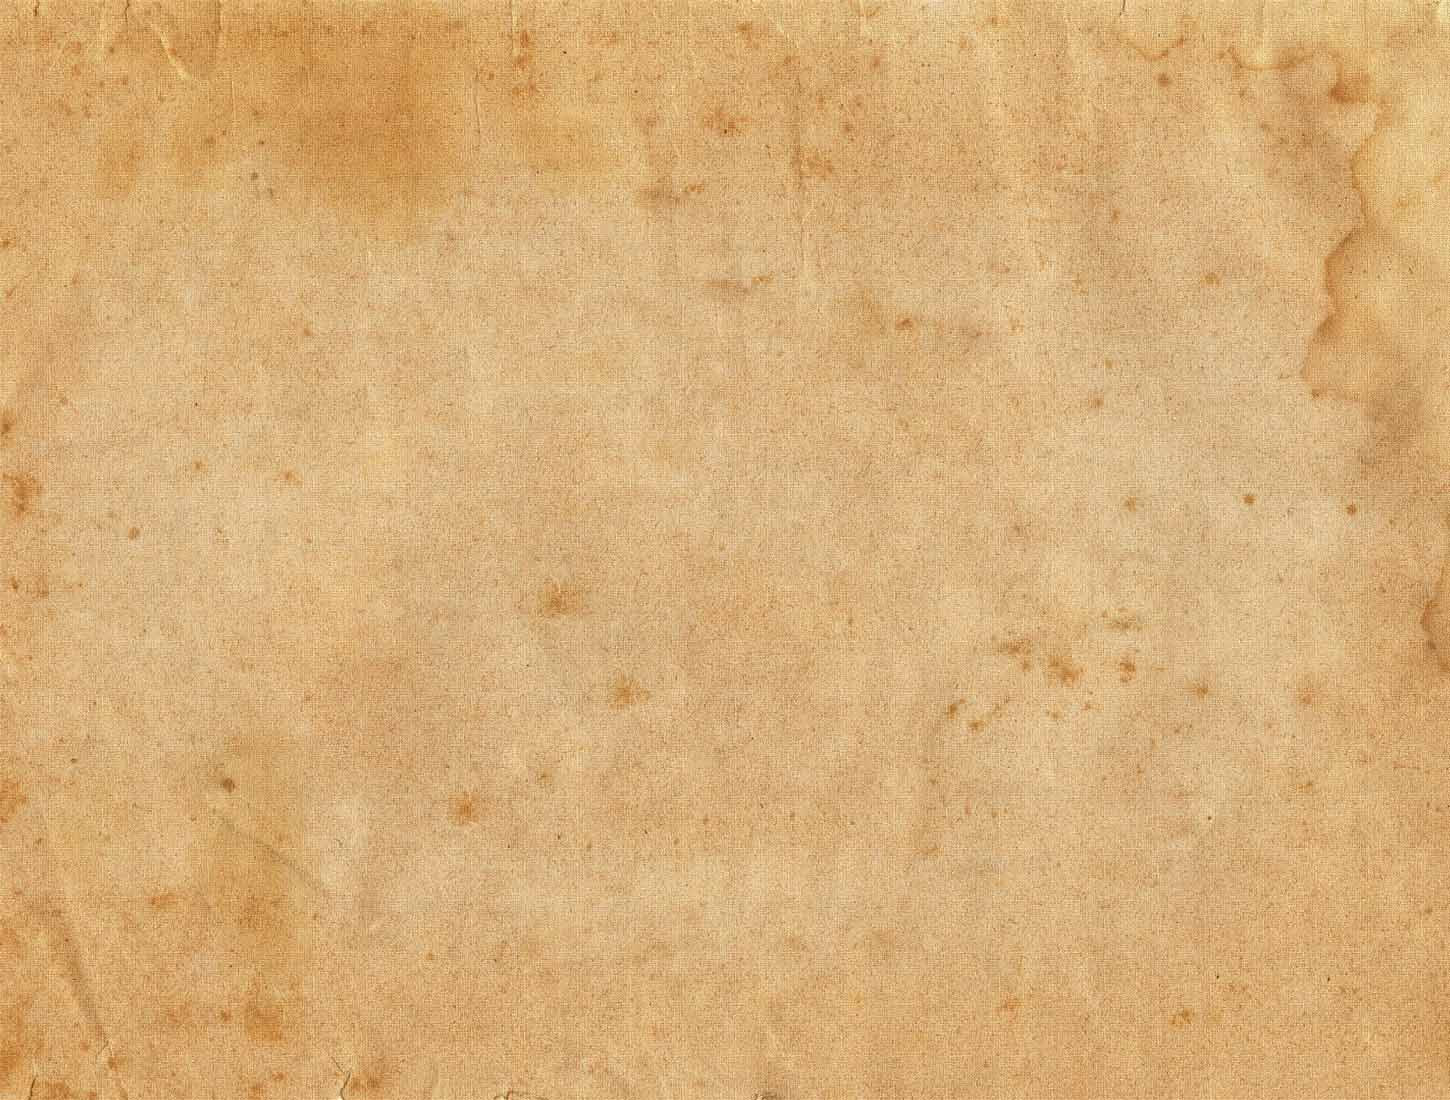 Blank Newspaper Background Image - New Background Image Throughout Blank Old Newspaper Template